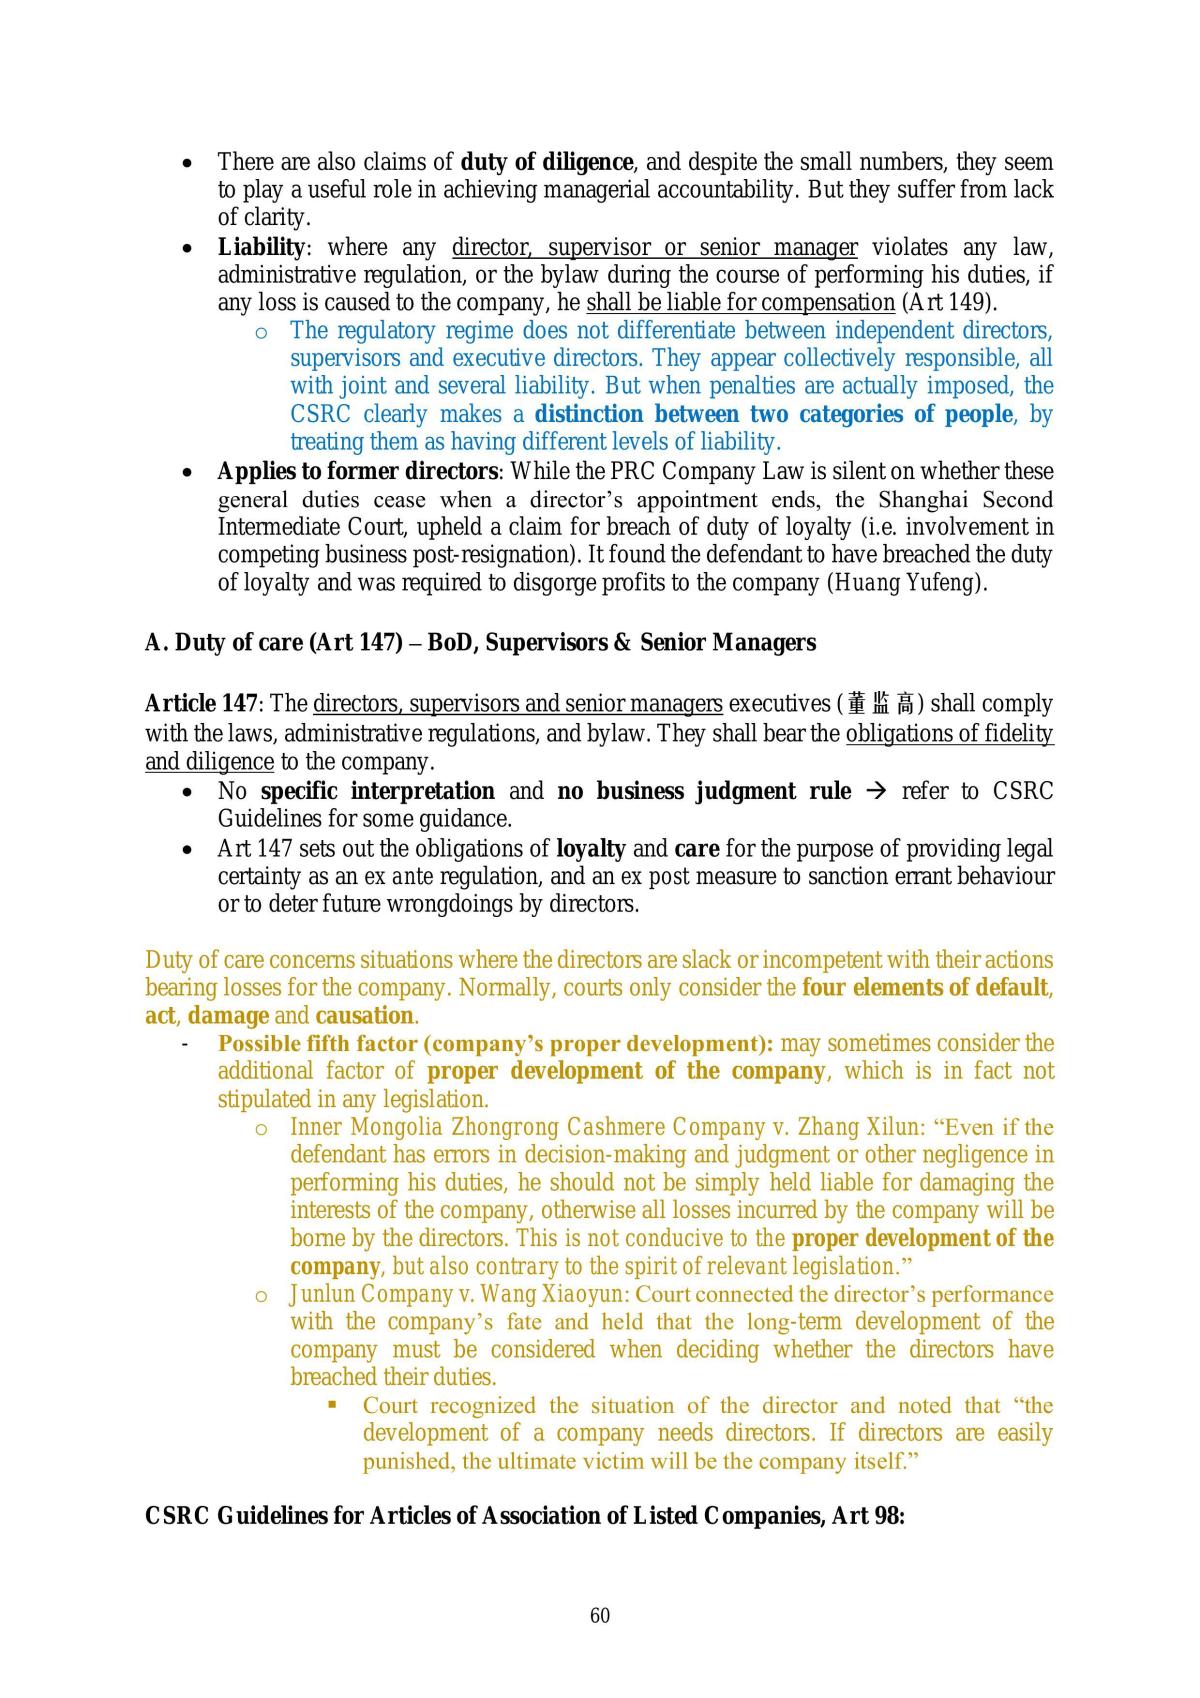 Chinese C&S Law Notes - Page 60